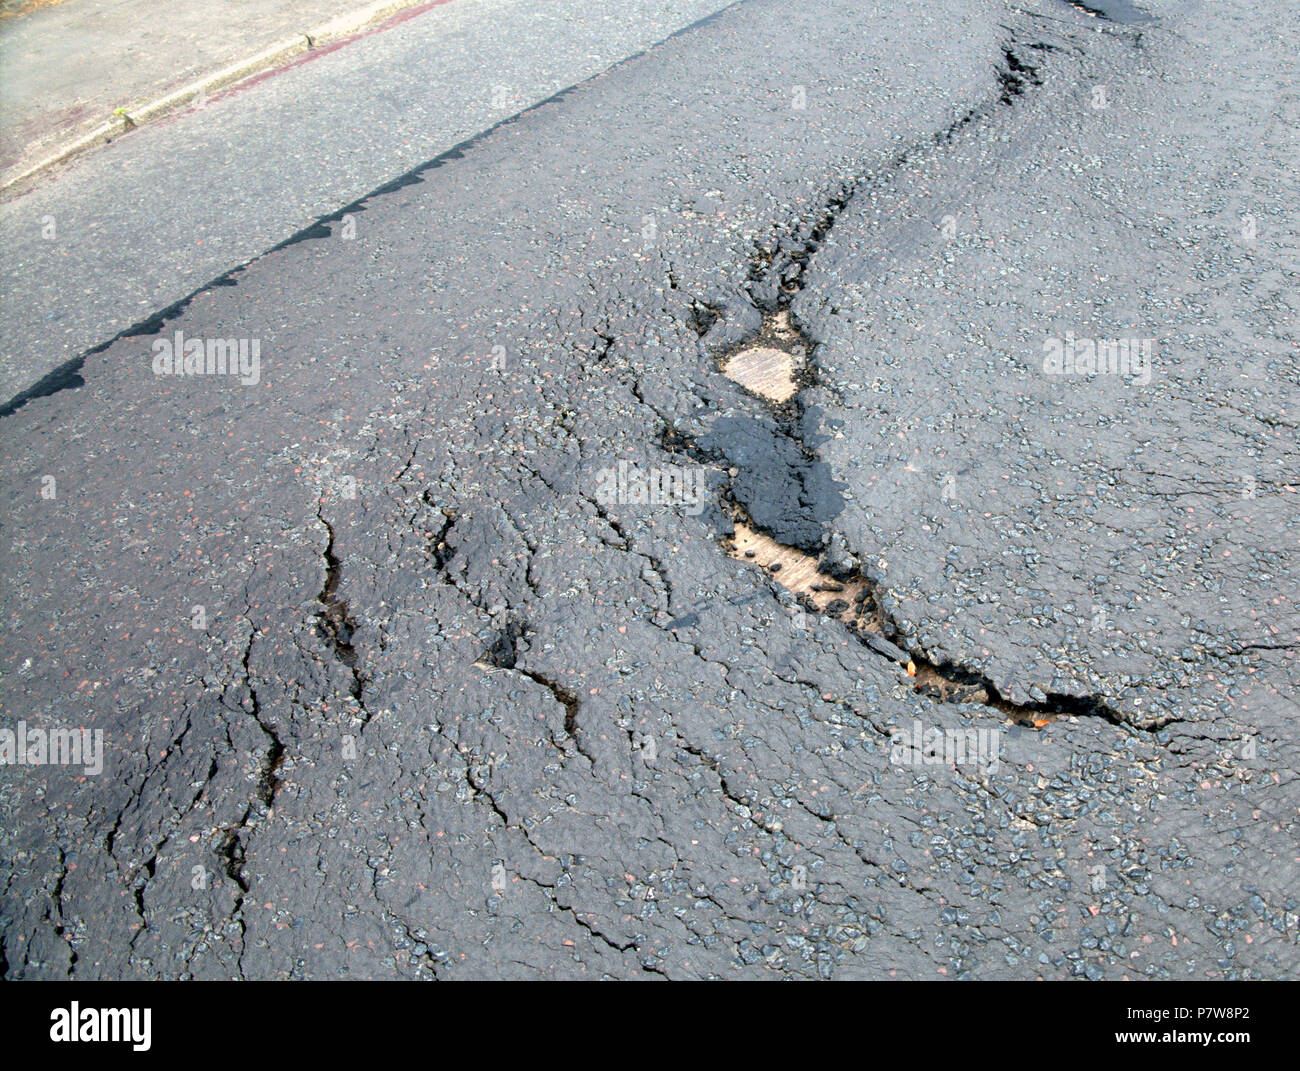 Glasgow, Scotland, UK  8th July. UK Weather:Sunny sizzling weather continues and the road surface folds cracks and breaks as it ripples under the heat the tarmac suffers badly. Gerard Ferry/Alamy news Stock Photo